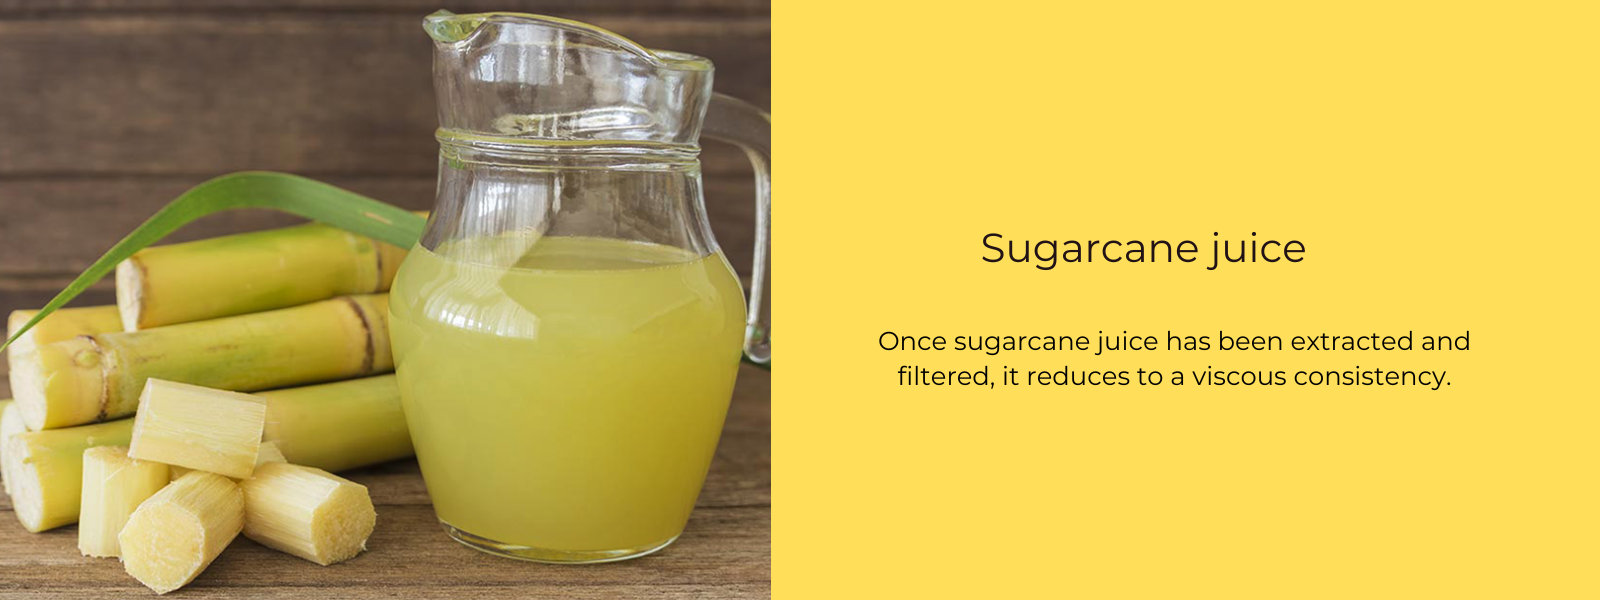 Sugarcane juice – Health Benefits, Uses and Important Facts